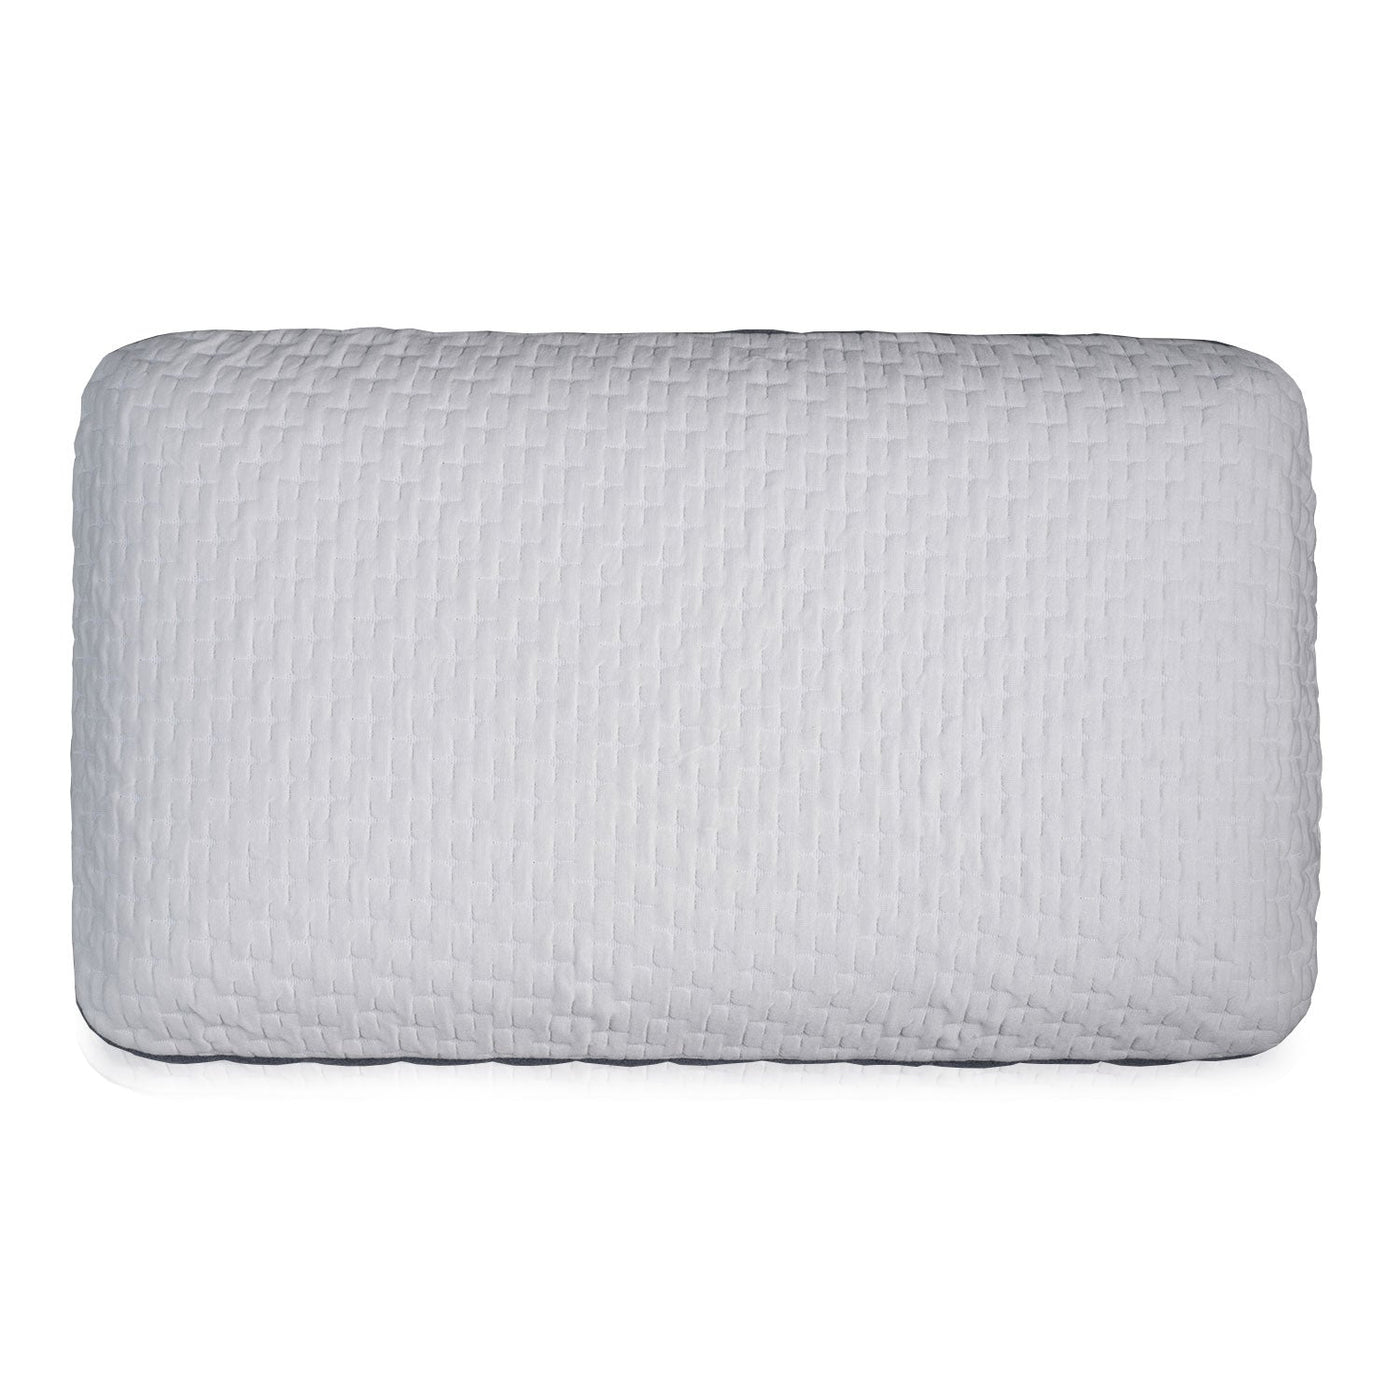 Bamboo Charcoal and Gel Memory Foam Pillow - Washable Cover - mysleepscience.com